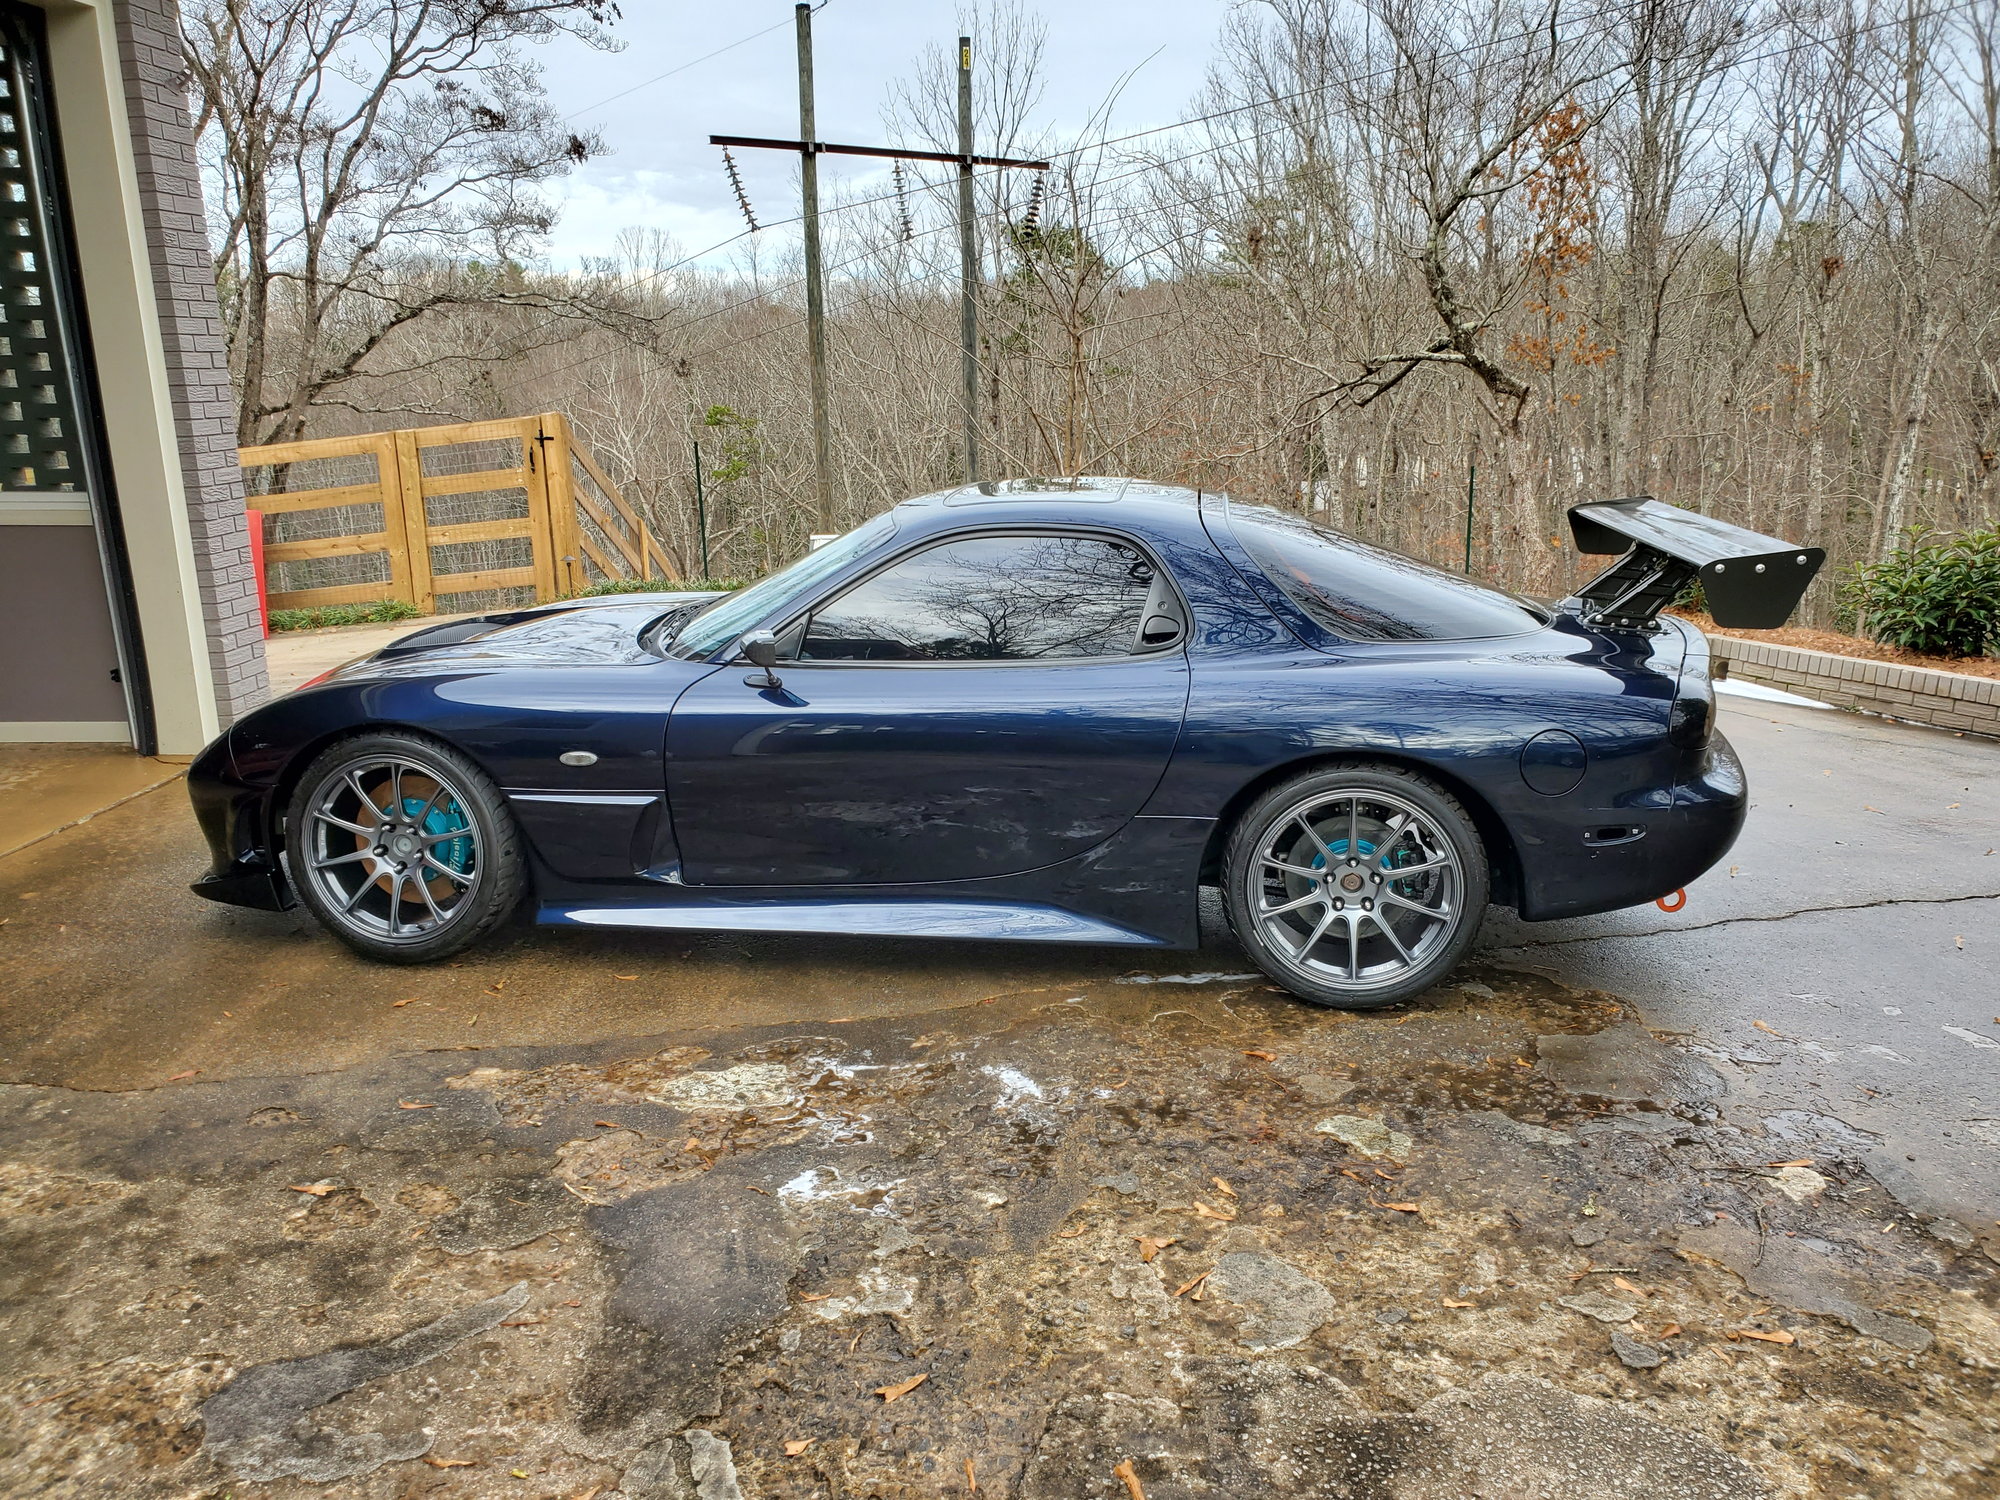 1994 Mazda RX-7 - 1994 Touring Mazdaspeed GTC body kit++  Many Extra JDM Parts (second owner) - Used - Gainesville, GA 30501, United States